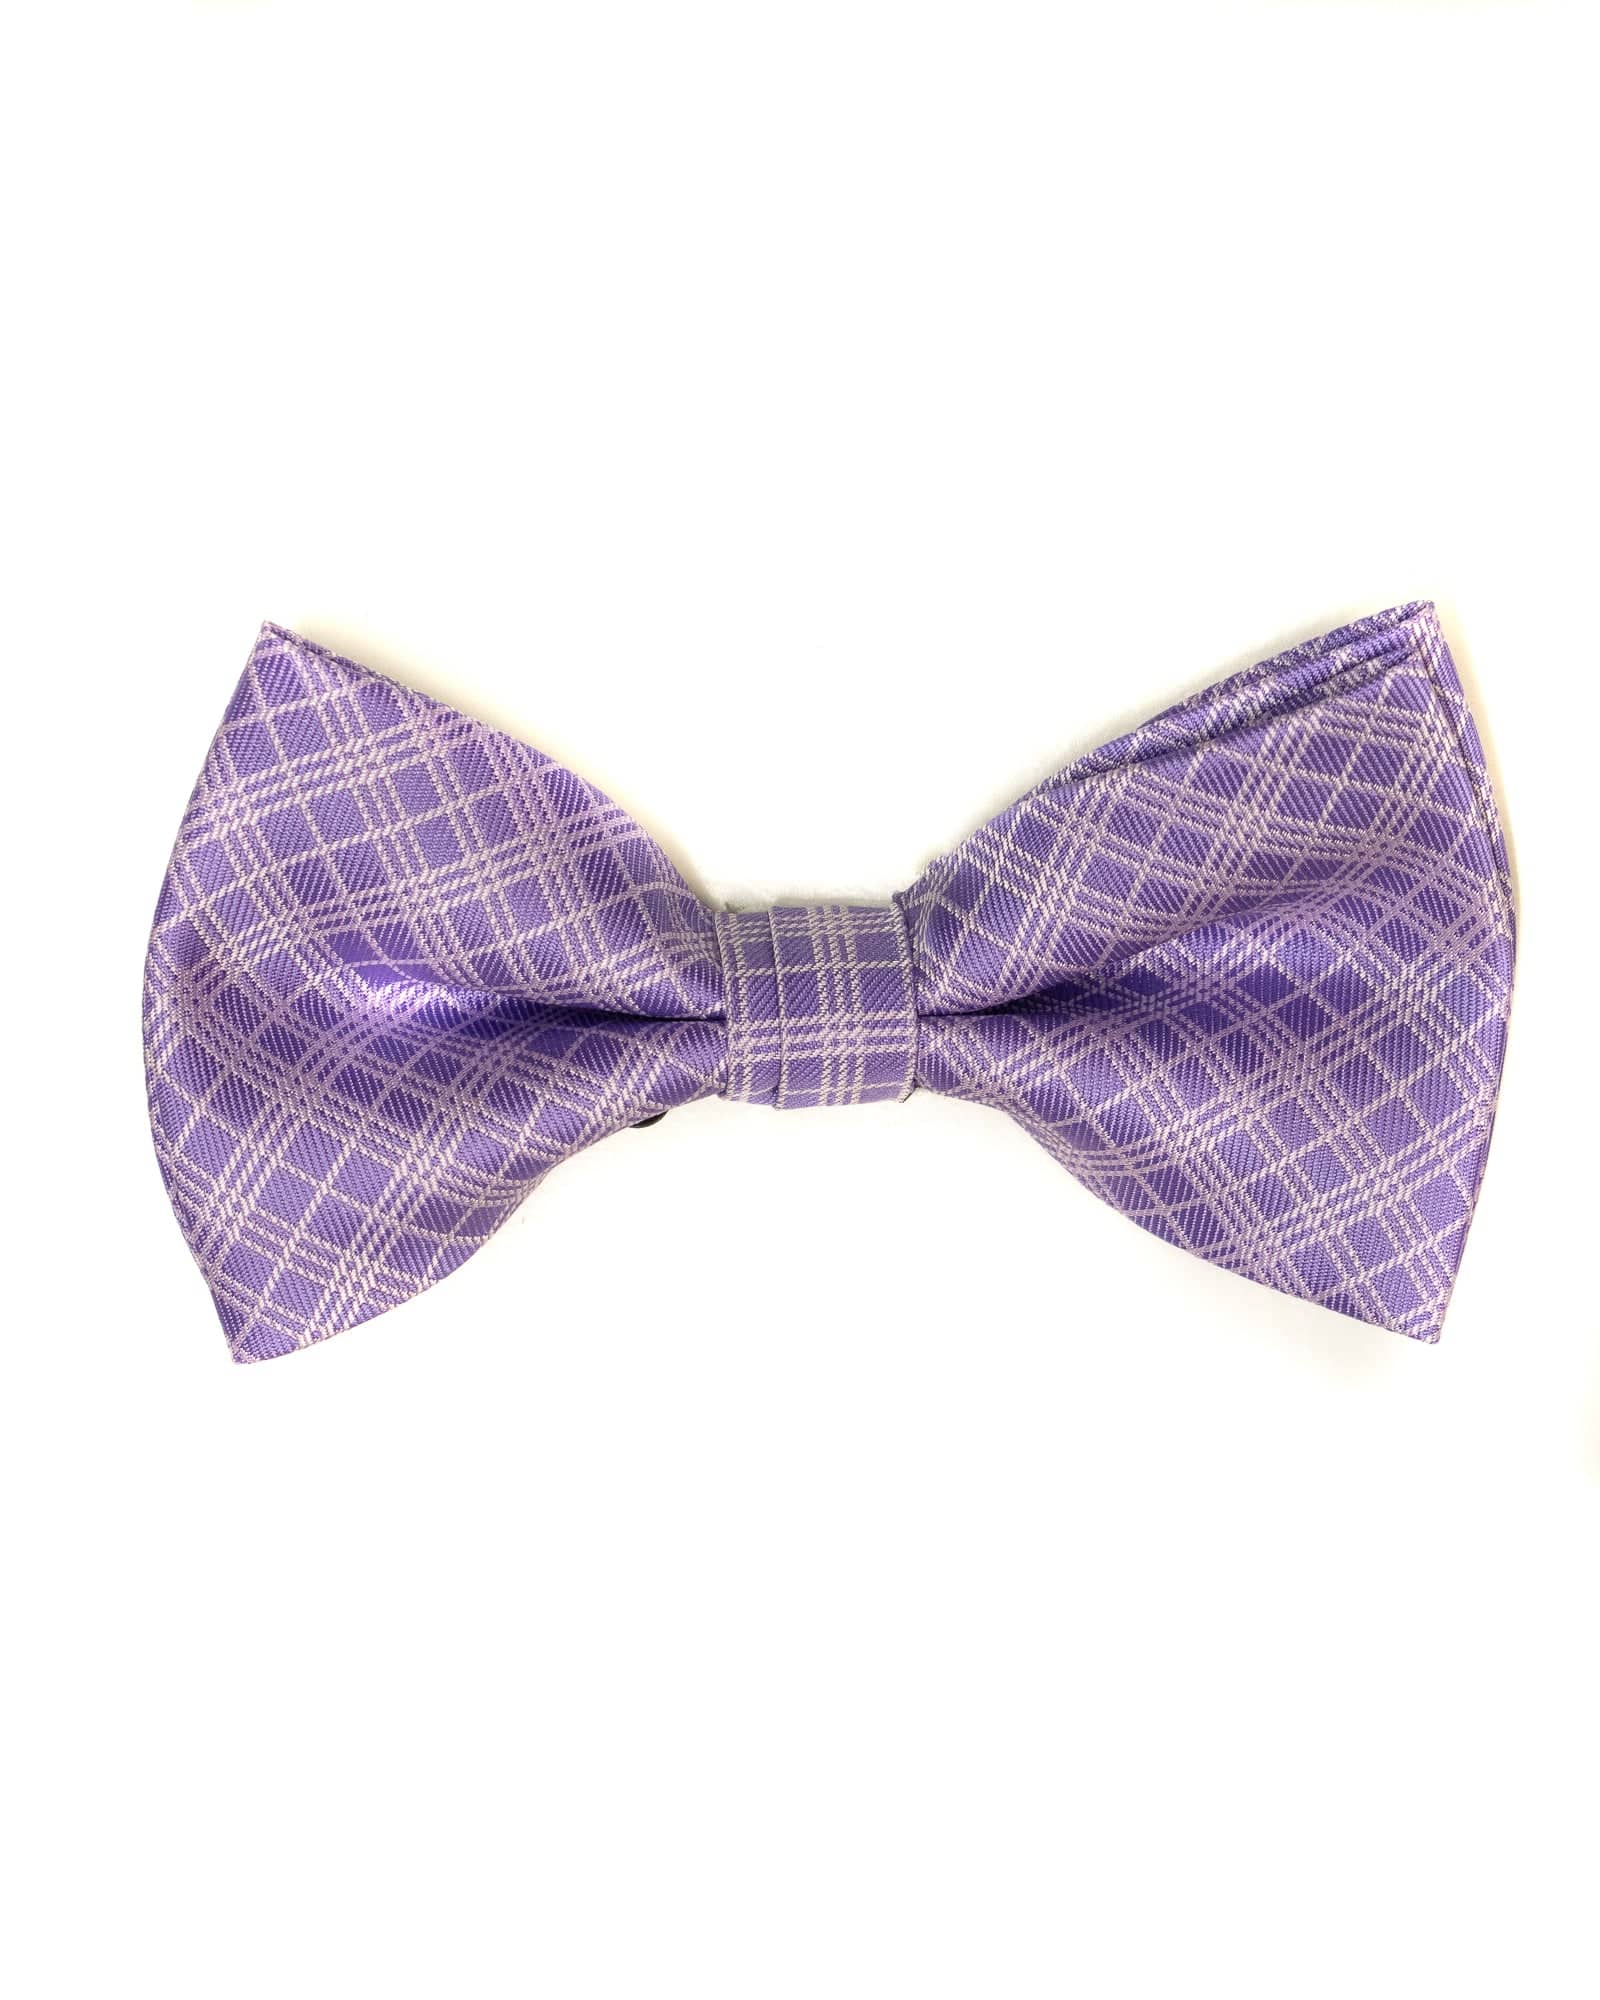 Bow Tie In Plaid Pattern Lavender & Grey - Rainwater's Men's Clothing and Tuxedo Rental